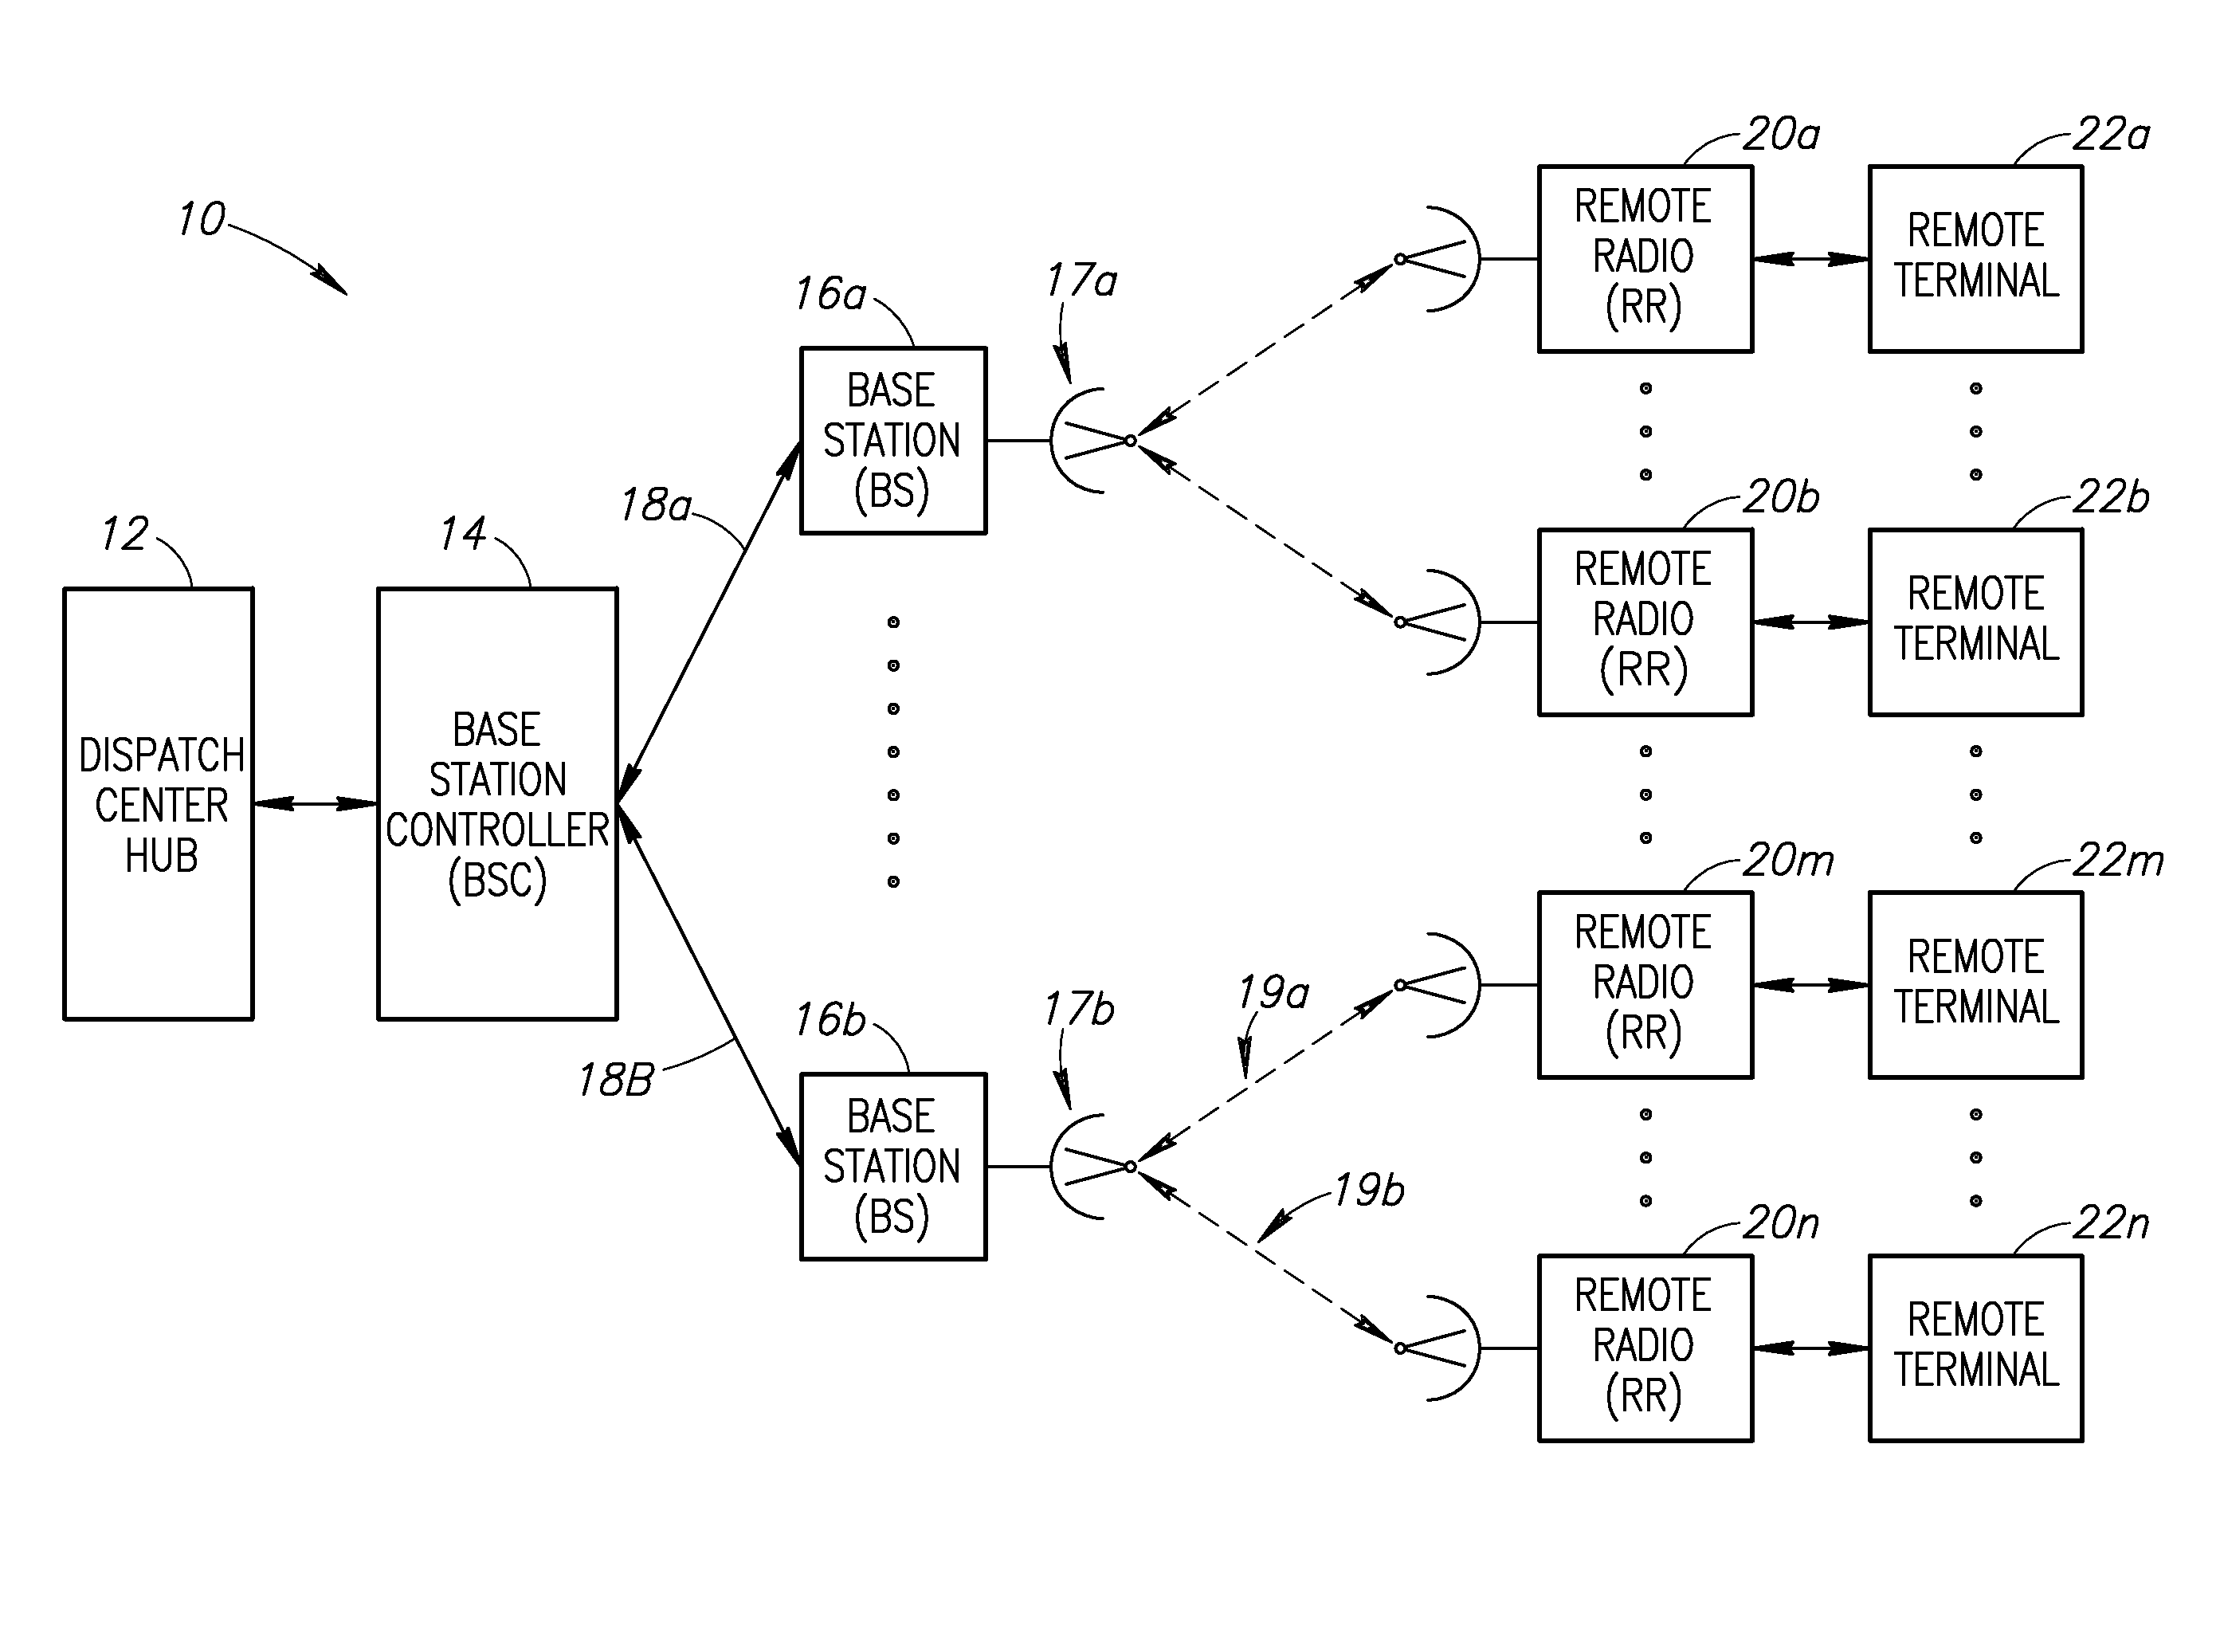 System and method for the delivery of high speed data services over dedicated and non-dedicated private land mobile radio (PLMR) channels using cognitive radio technology